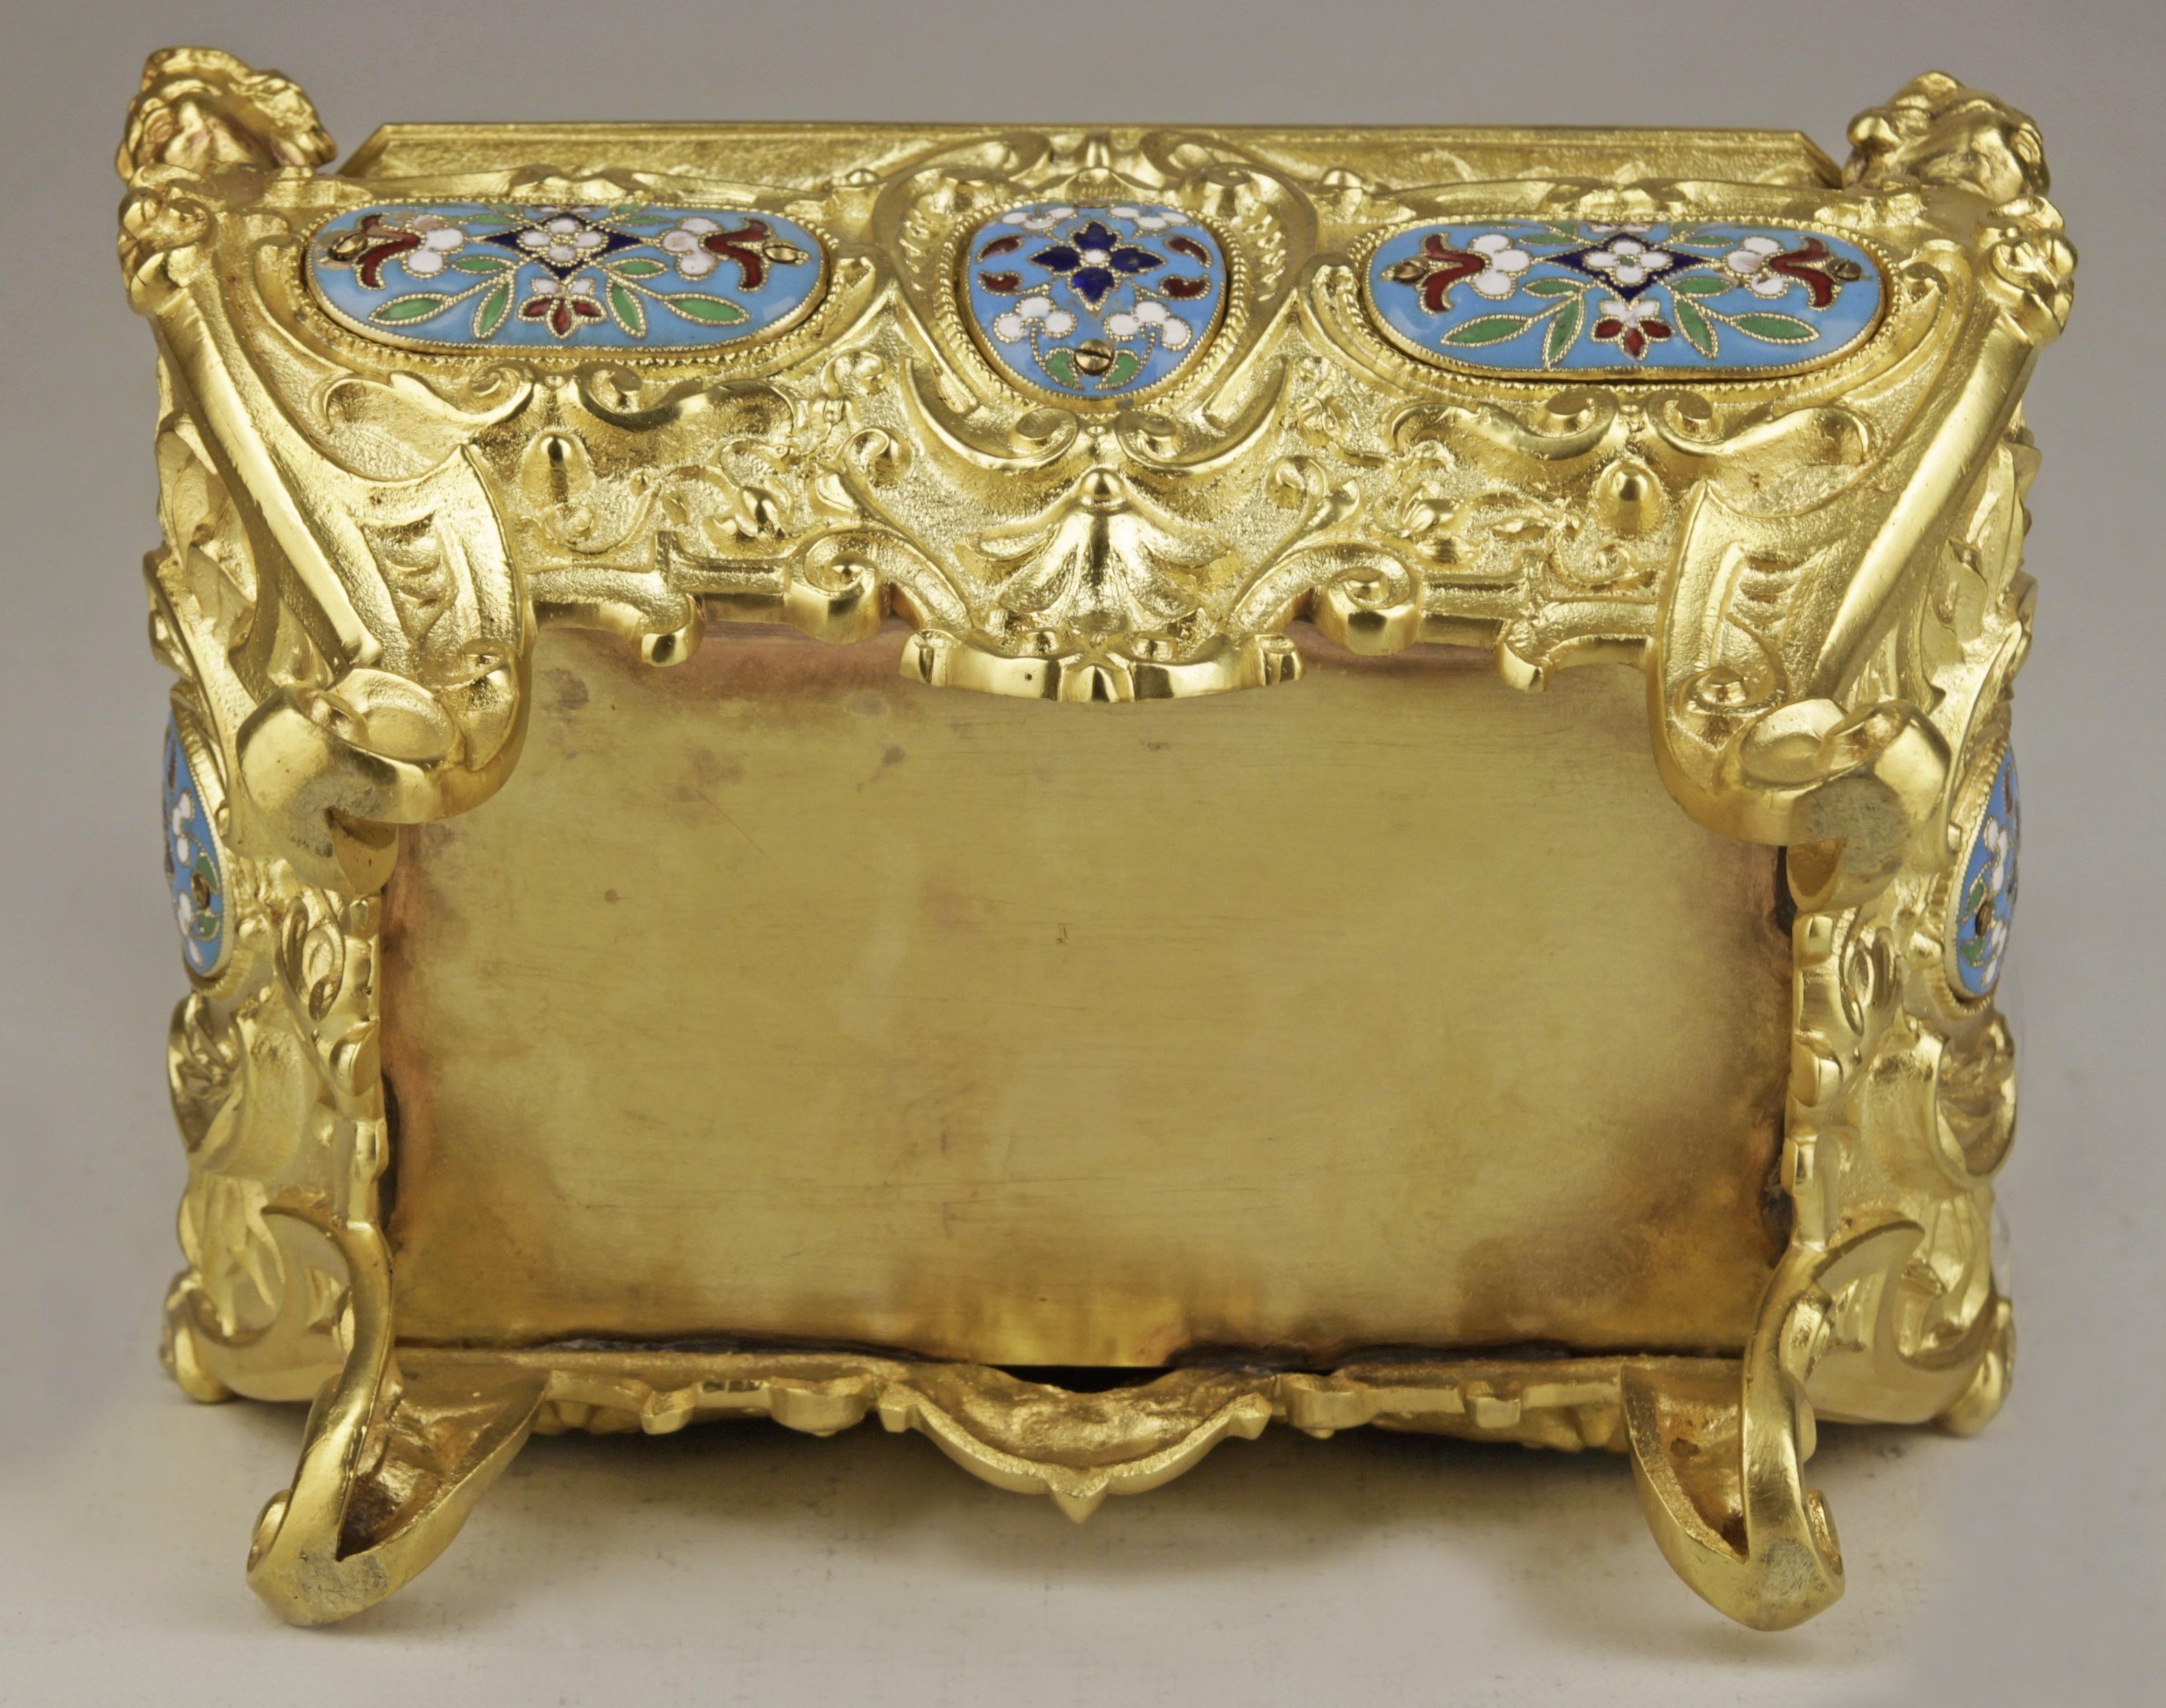 19th Century French Empire Cloisonné Bronze Jewelry Casket with Velvet Interior For Sale 1